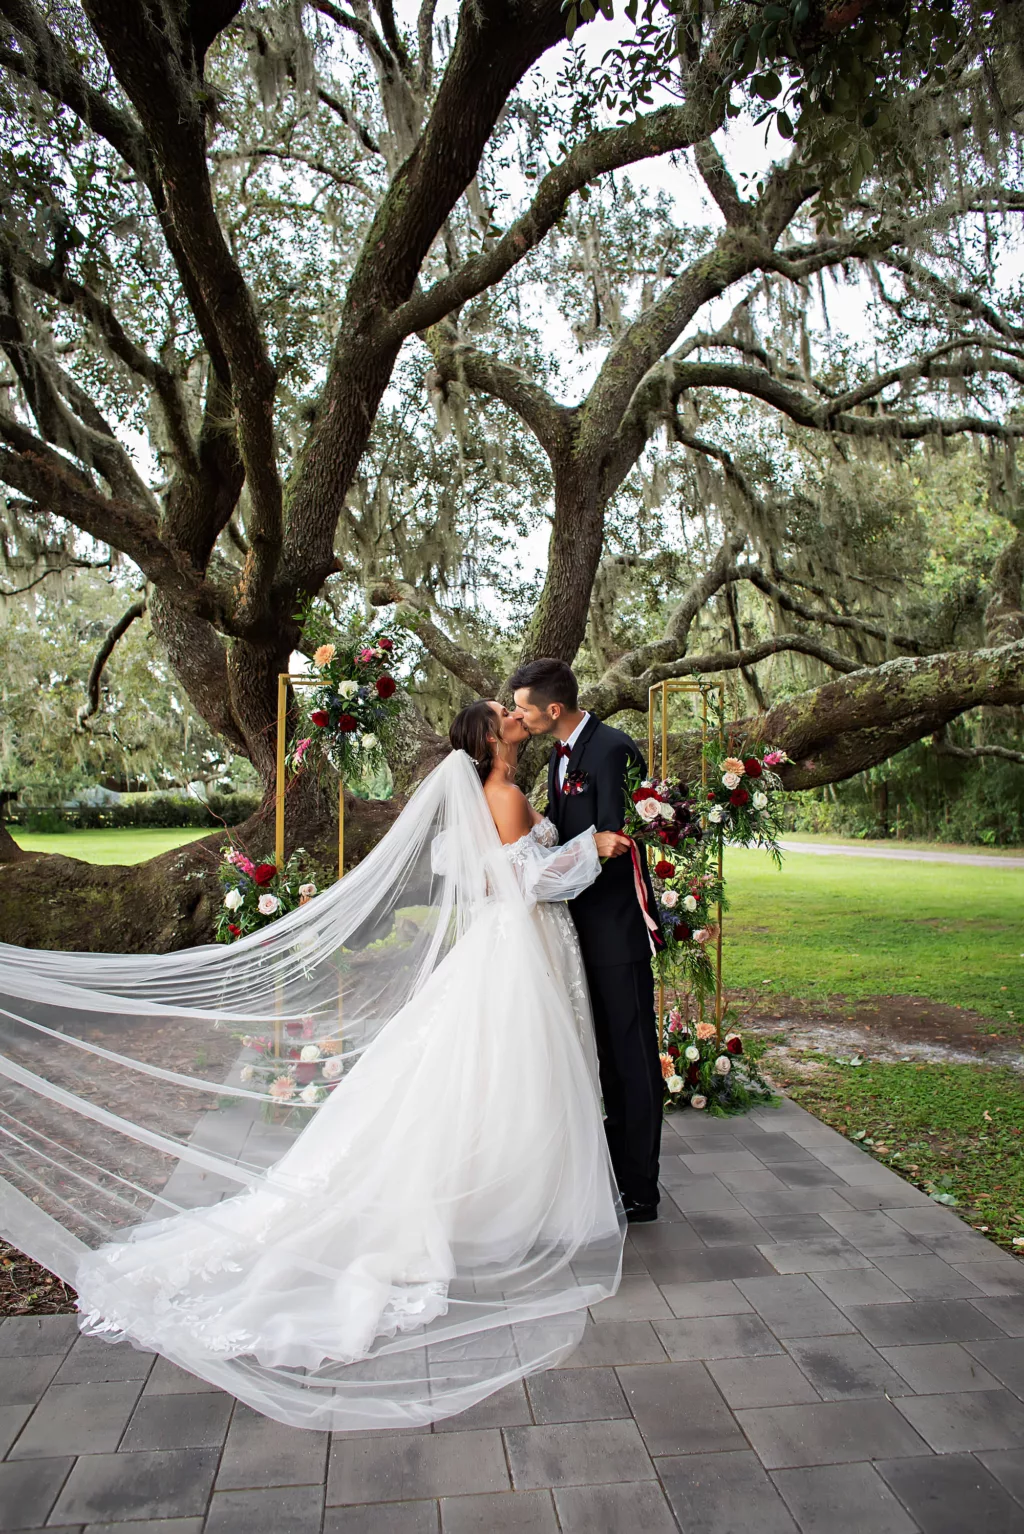 Bride and Groom First Kiss Wedding Portrait | Gold Wedding Ceremony Tree Arch with Red Roses, Blue Thistle, Pink Roses, Peach Chrysanthemums, White Bacopa, and Greenery Decor Ideas | Tampa Bay Florist Save The Date Florida | Event Venue Legacy Lane Weddings | Brooksville Photographer Limelight Photography | Videographer Priceless Studios